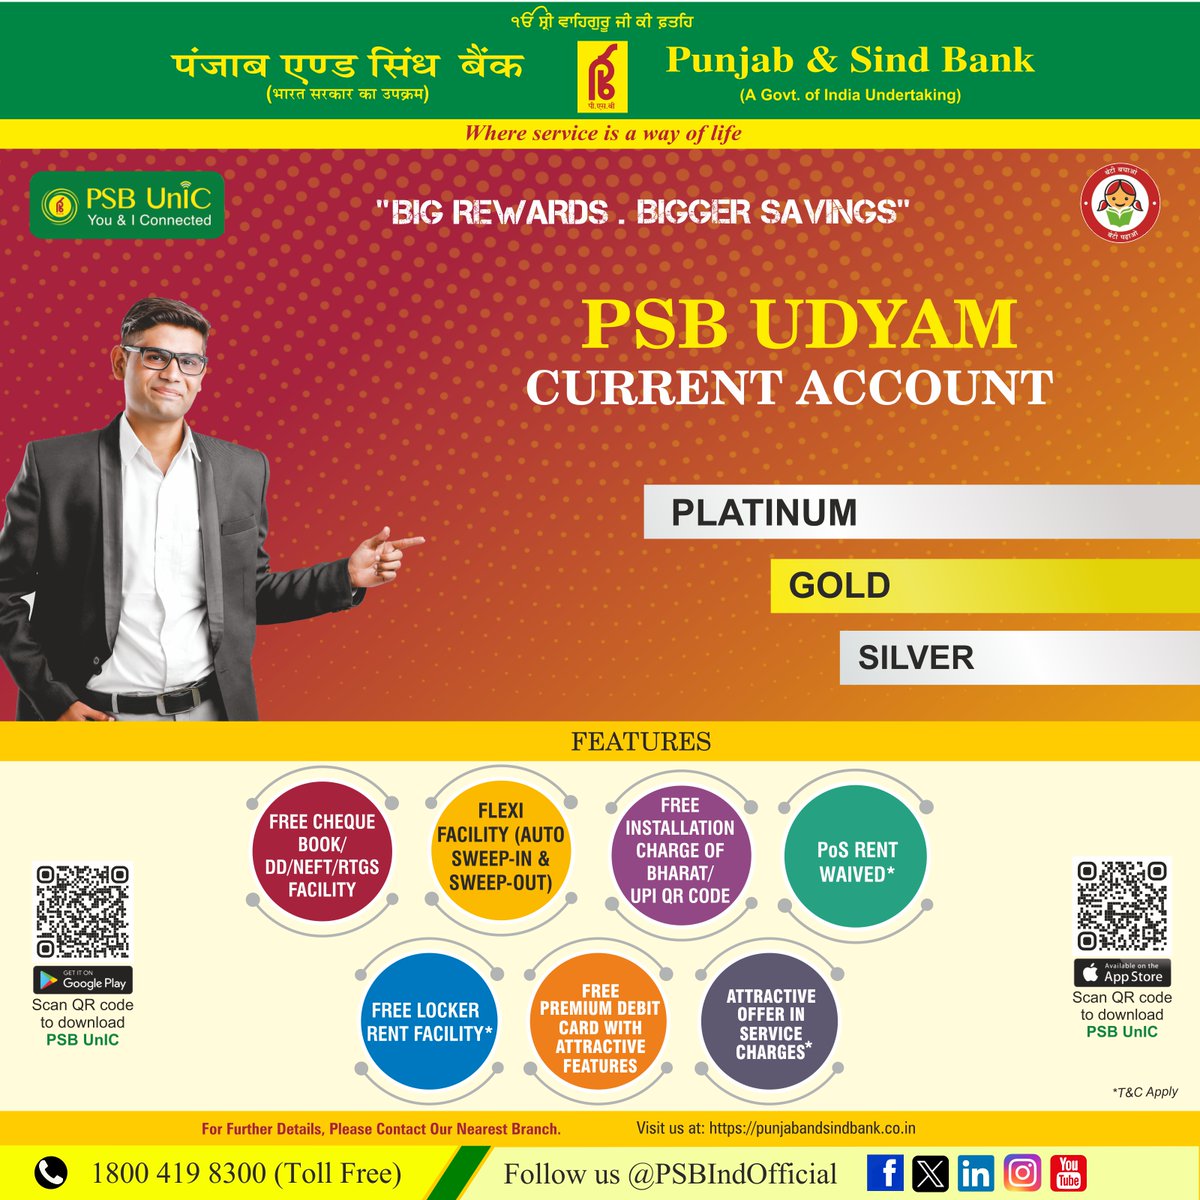 PSB Udyam Current Account: Banking solutions for your growing business.

#PSB #PunjabAndSindBank #PSBUdyamCurrentAccount #MSME #BusinessBanking #CurrentAccount